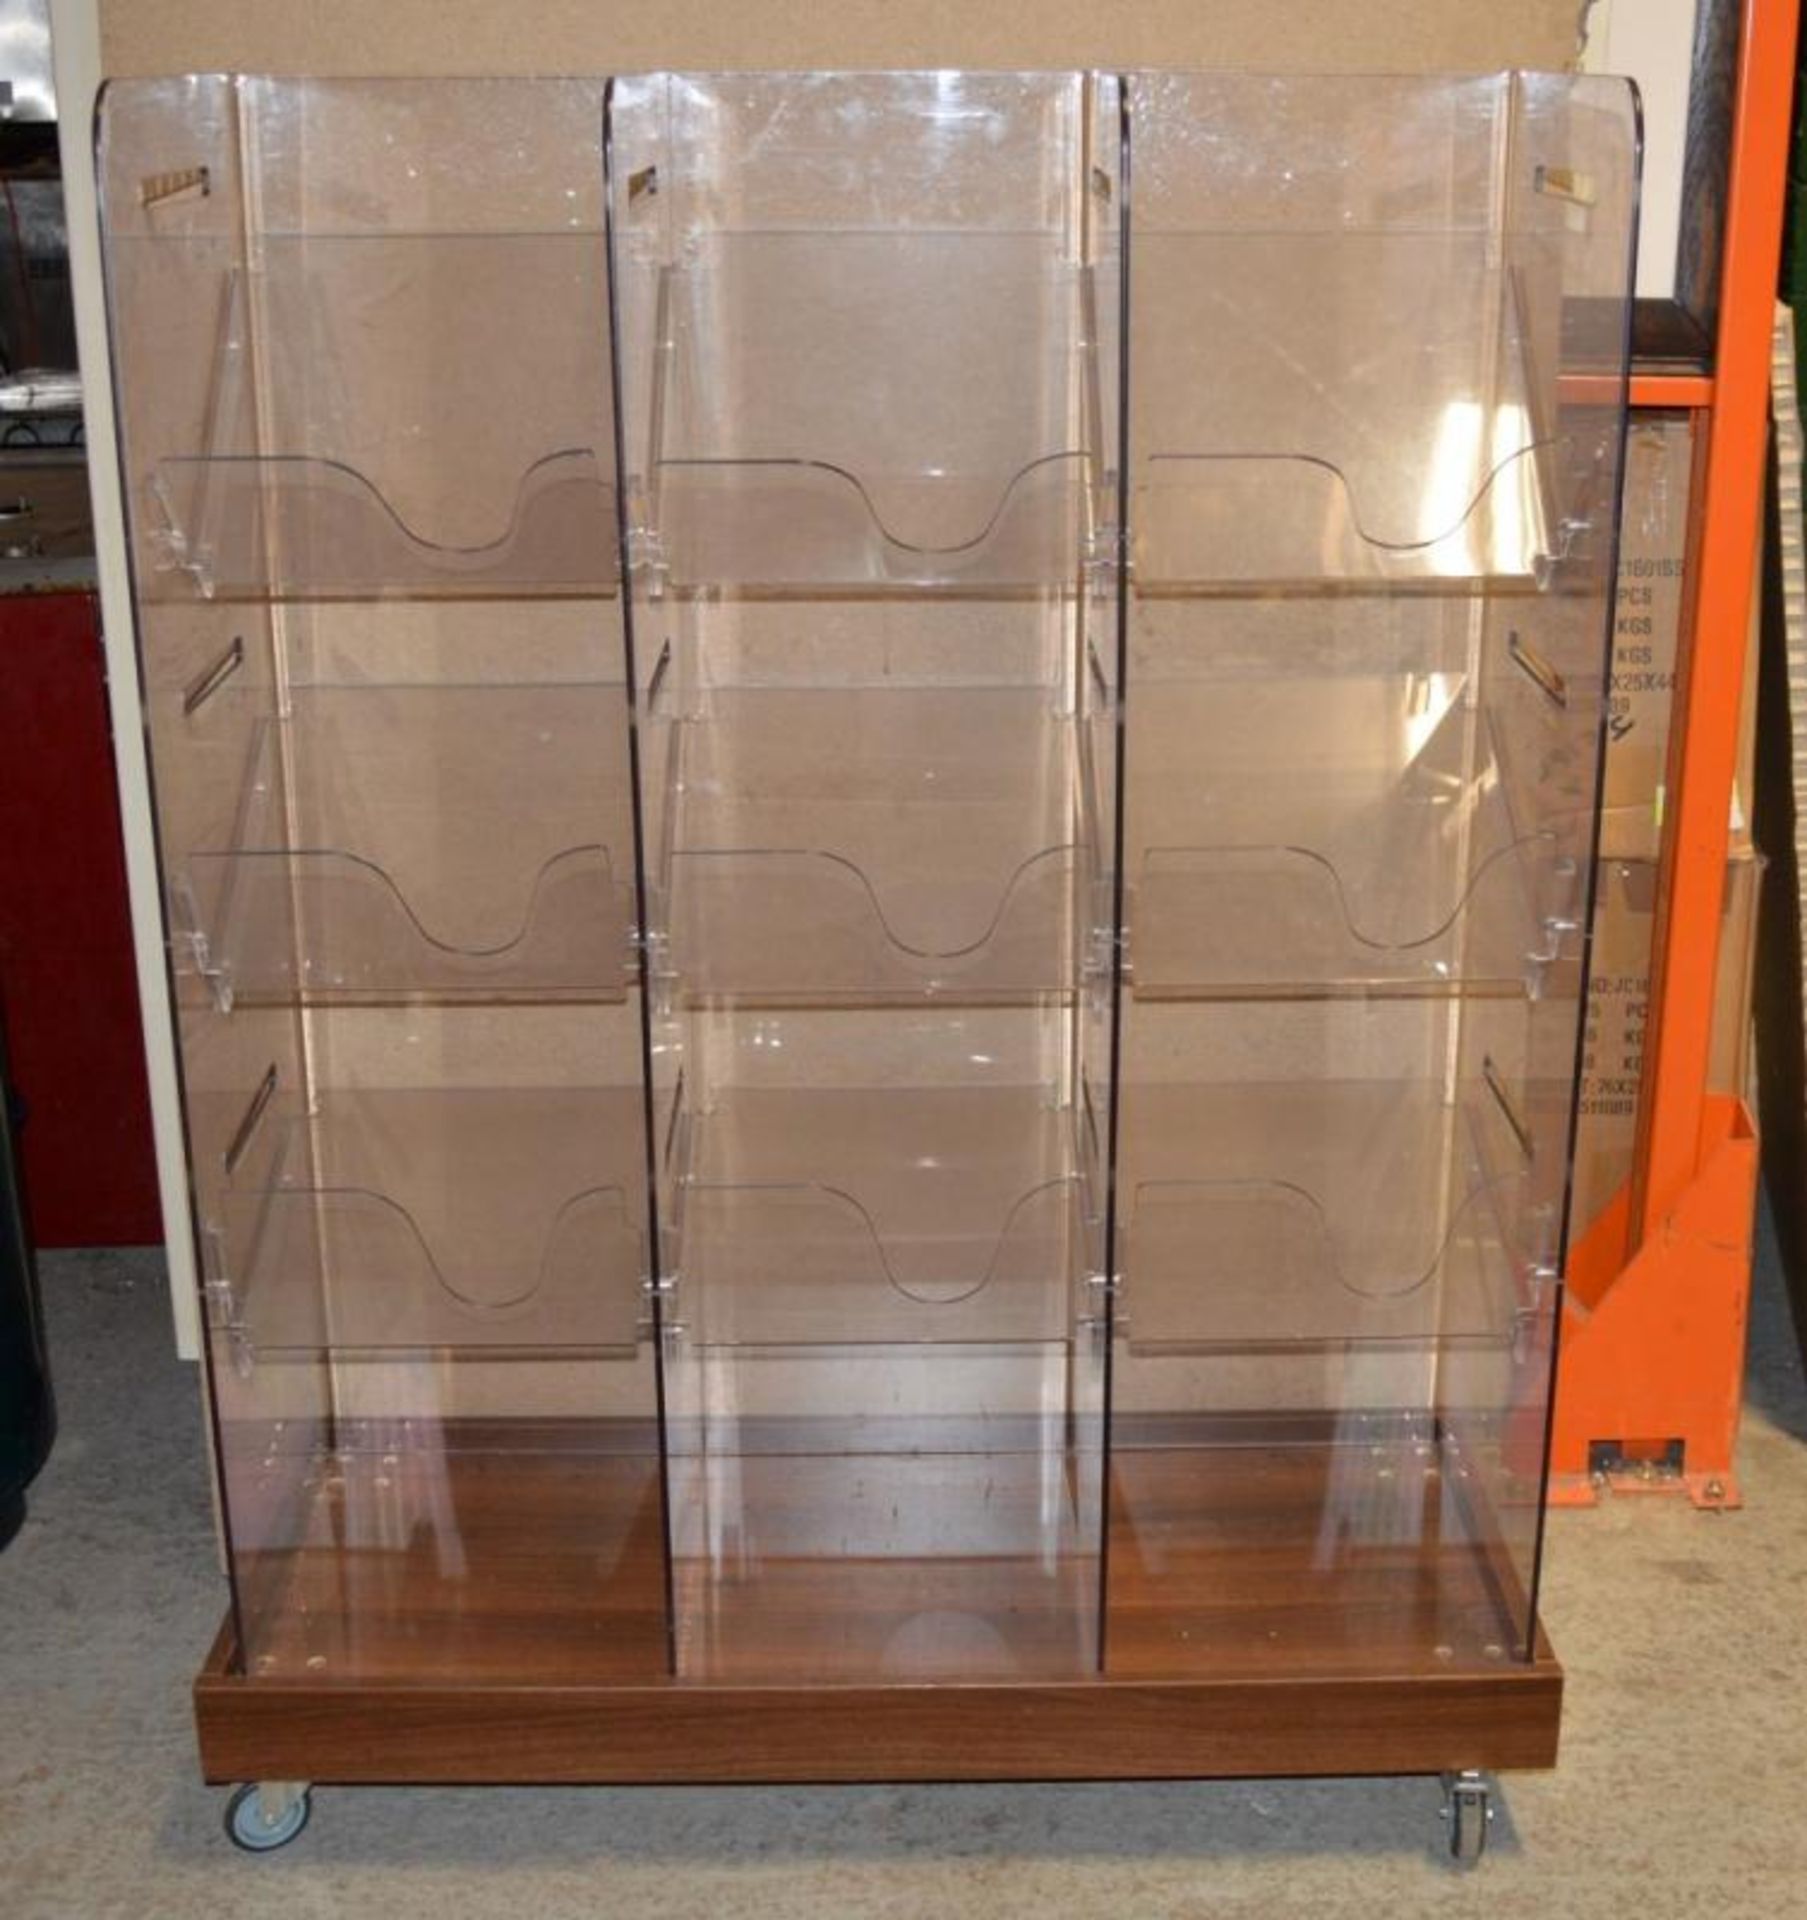 1 x Retail Magazine / Newspaper Display Unit - Clear Perspex With Walnut Base on Castors - H141 x - Image 4 of 6